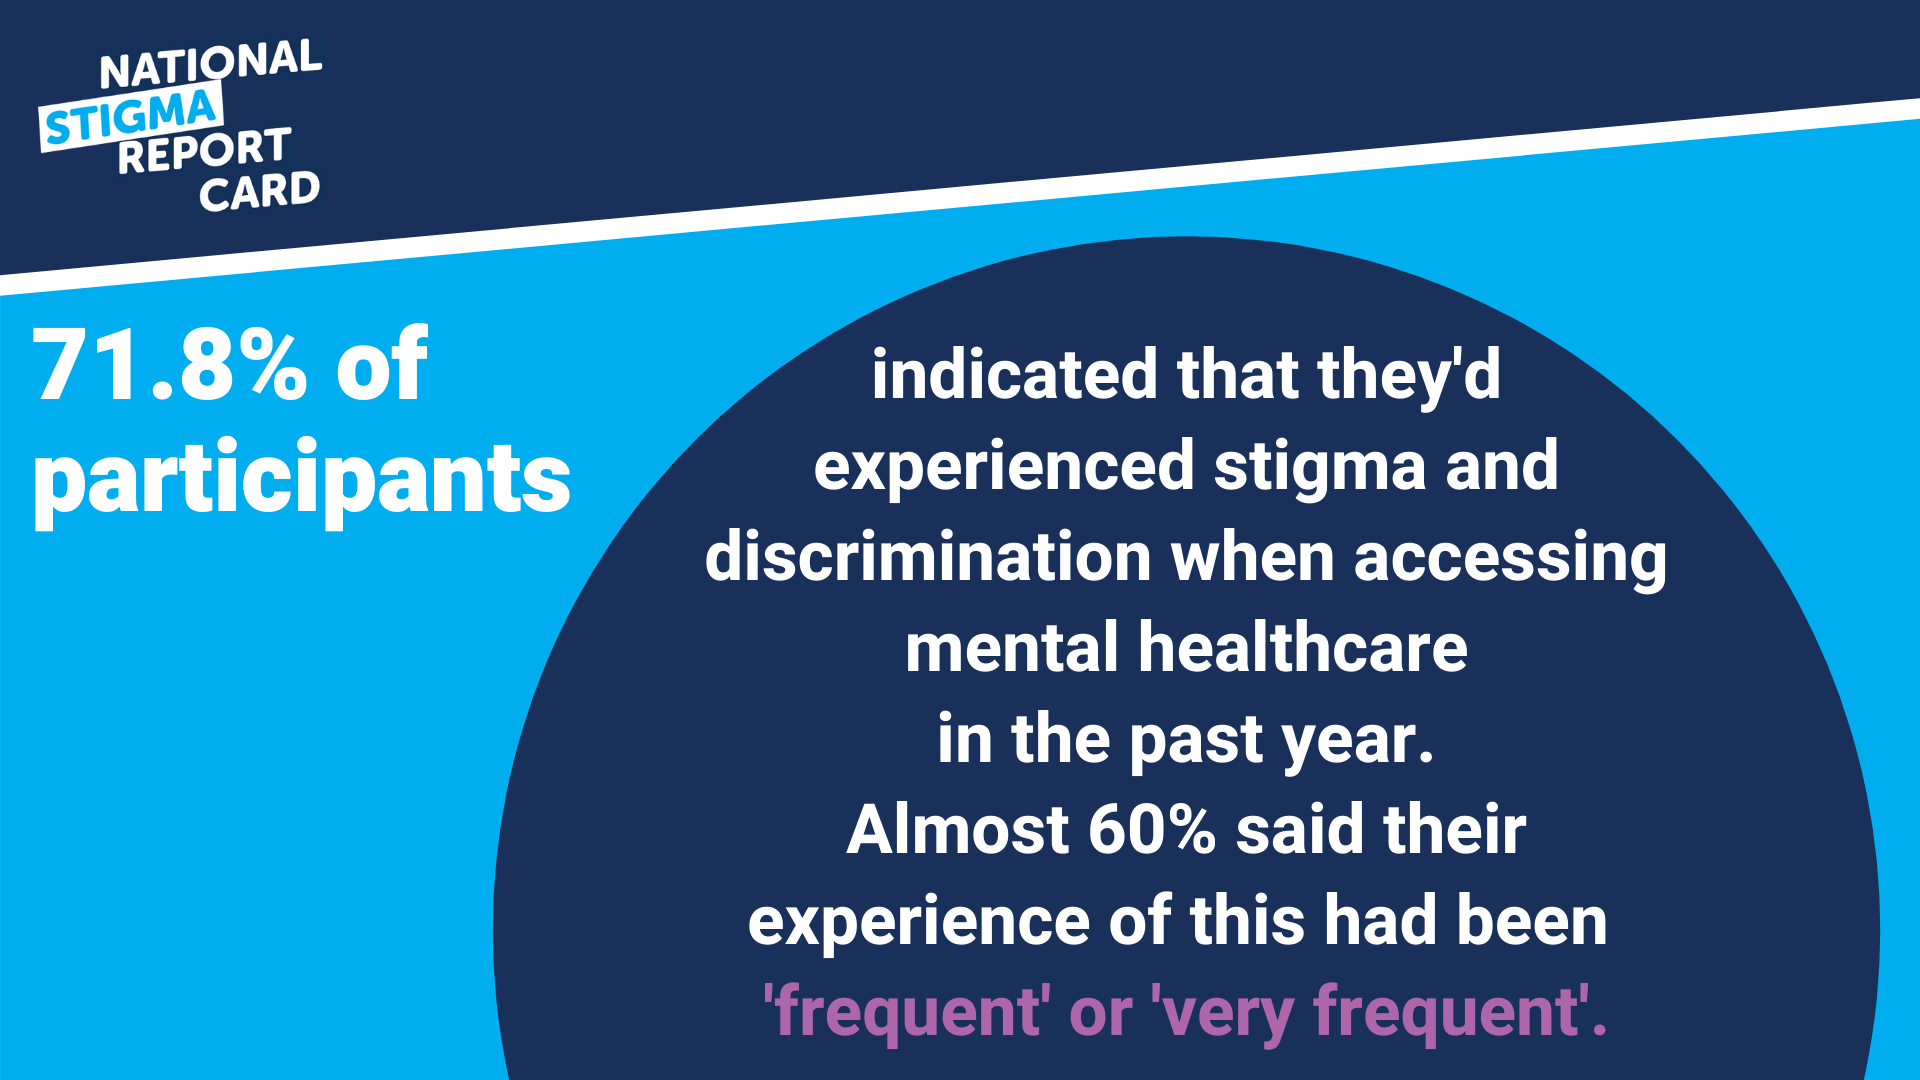 71.8% of participants indicated they'd experienced stigma when accessing mental healthcare in the past year.